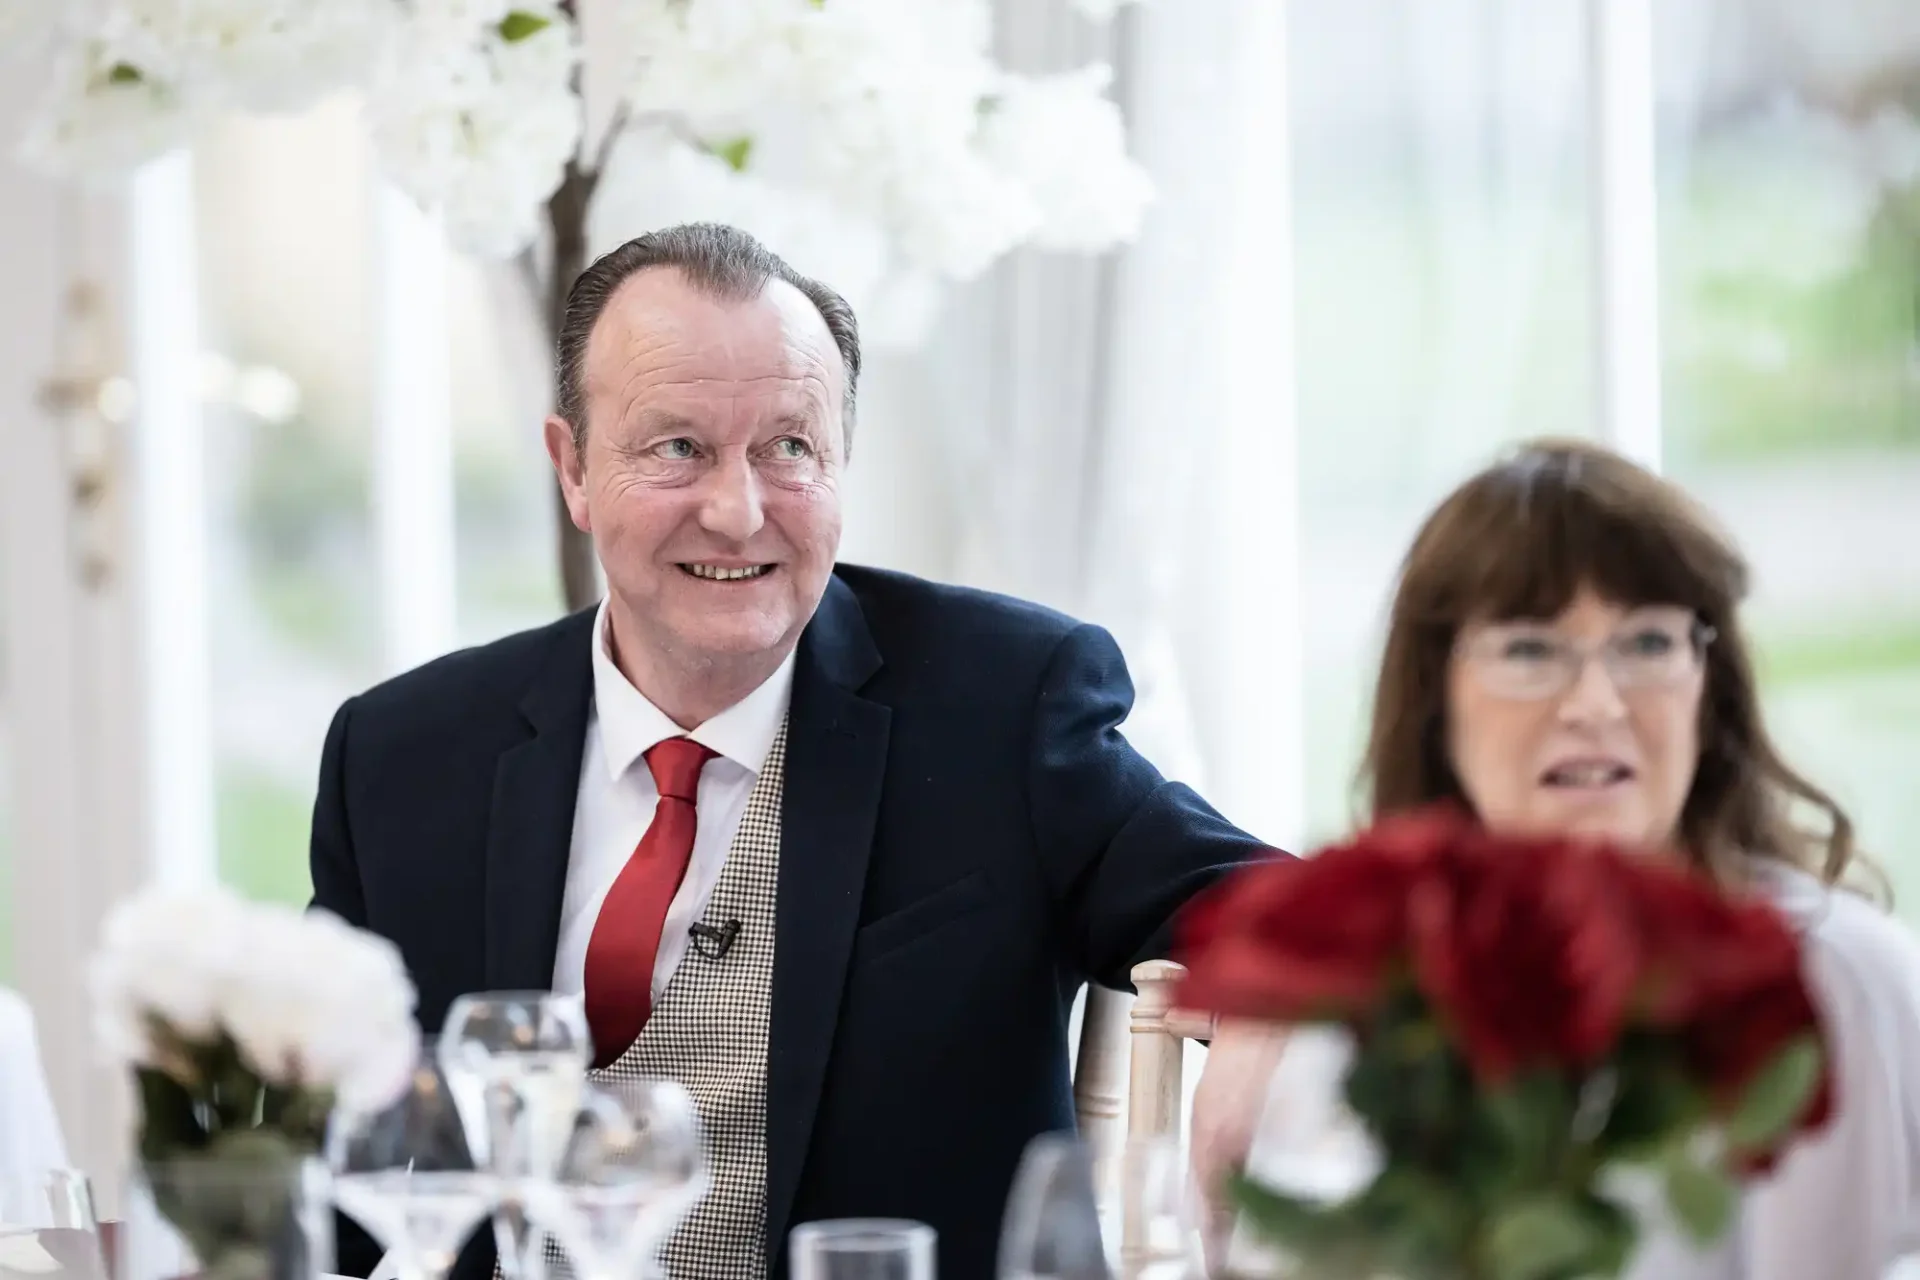 Older man in a suit and tie smiling at a social event, sitting beside a woman with a floral centerpiece in foreground.